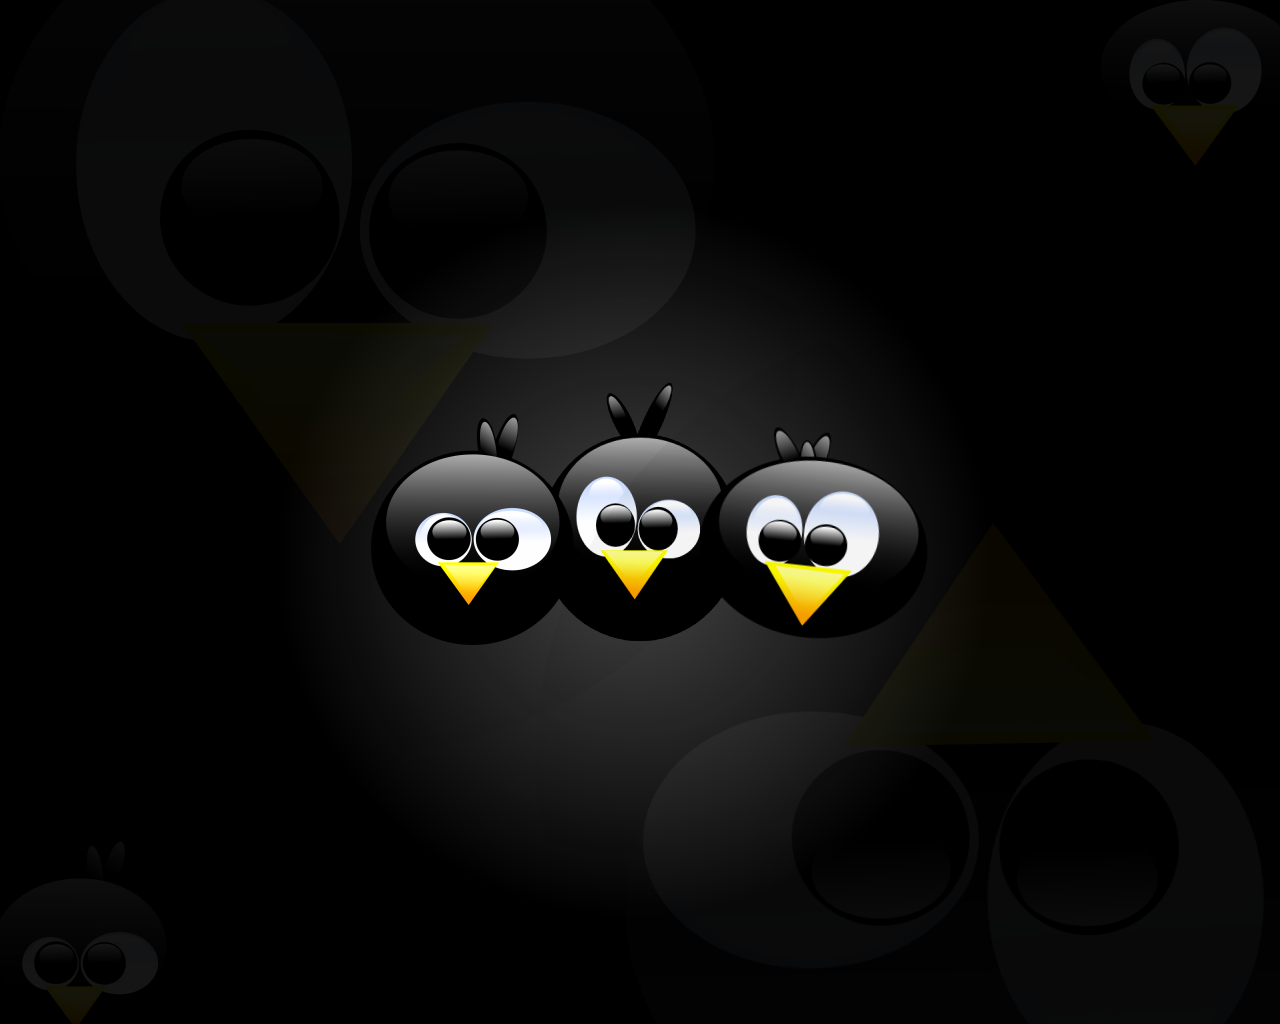 Cool Linux Wallpapers - Wallpaper Cave